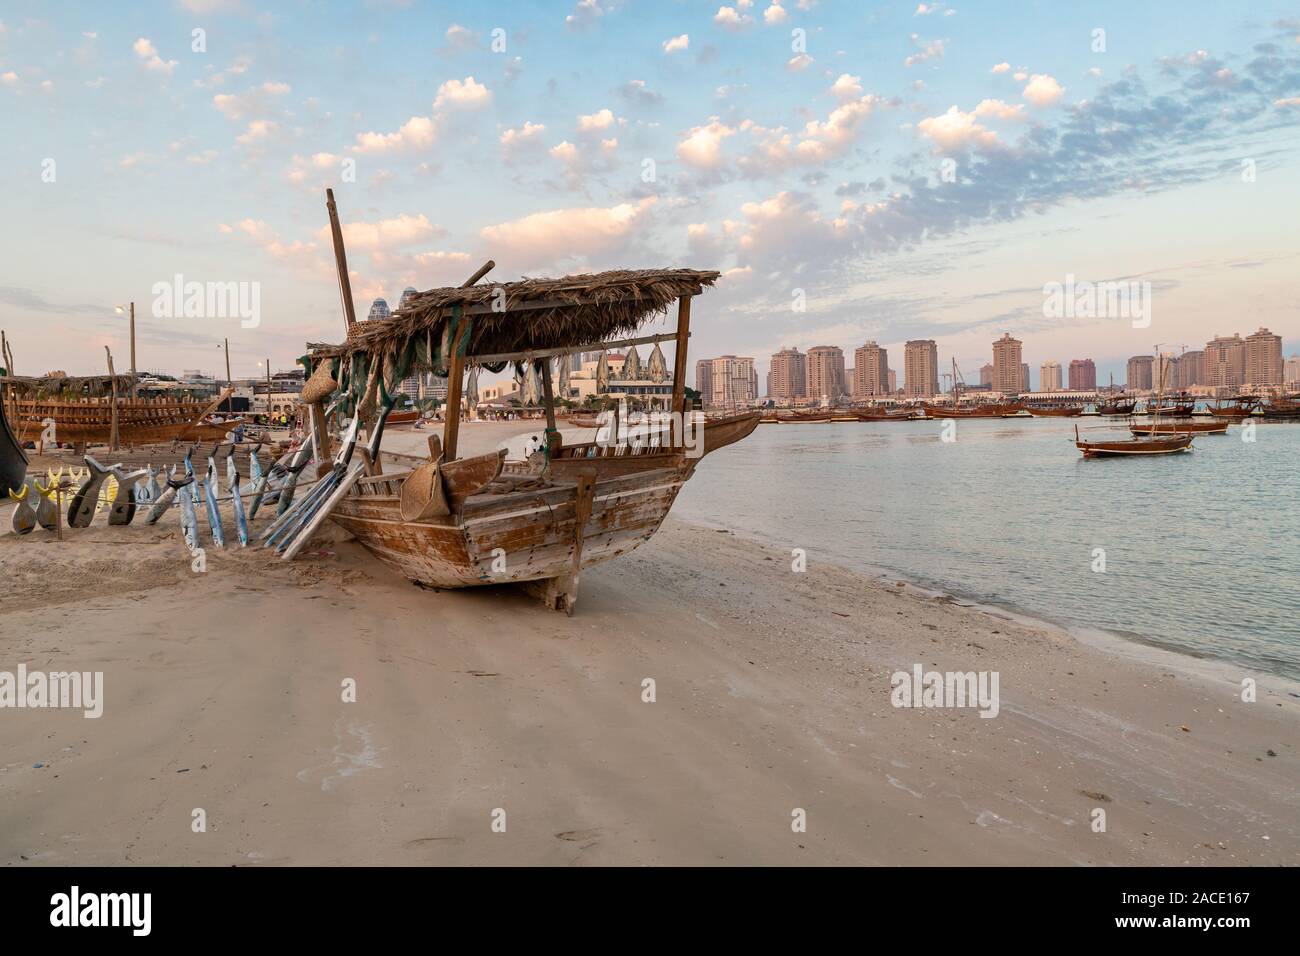 Traditional Dhow Festival in Katara cultural village, Doha, Qatar showing old decorated wooden Arabic boats with clouds in the sky in background Stock Photo